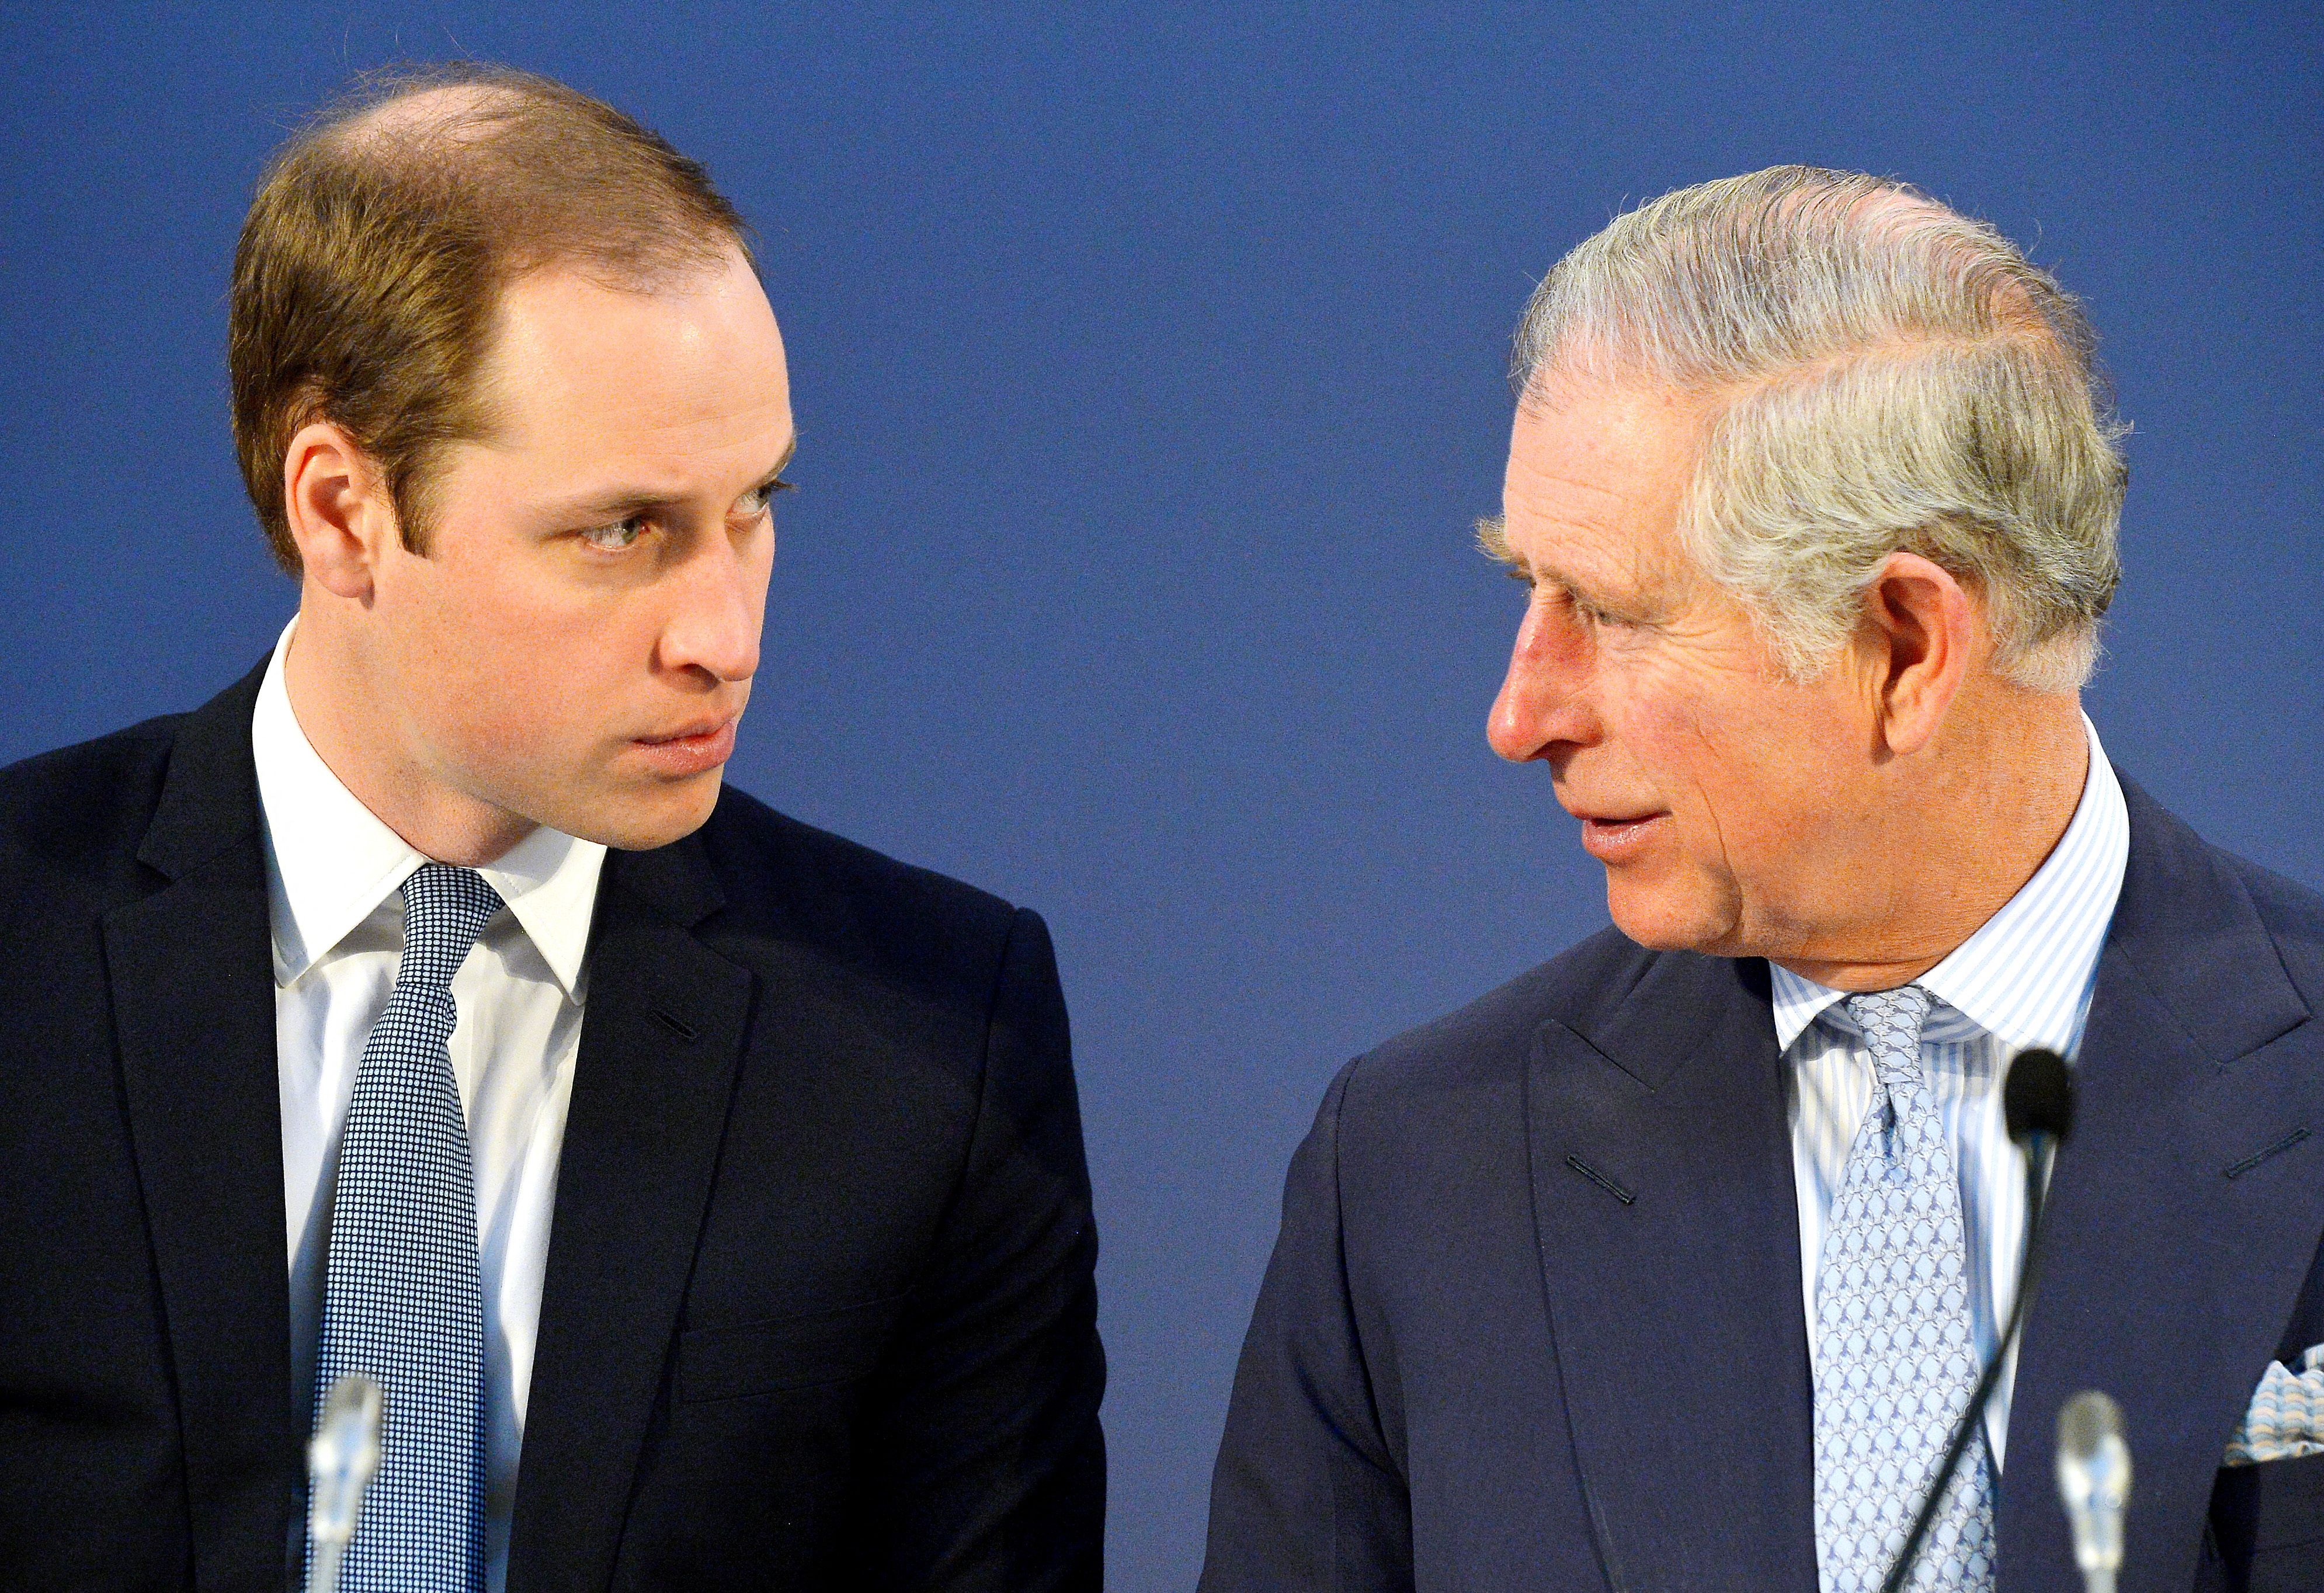 Britain's Prince William, and Britain's King Charles talk during the Illegal Wildlife Trade Conference at Lancaster House in London on February 13, 2014 | Source: Getty Images